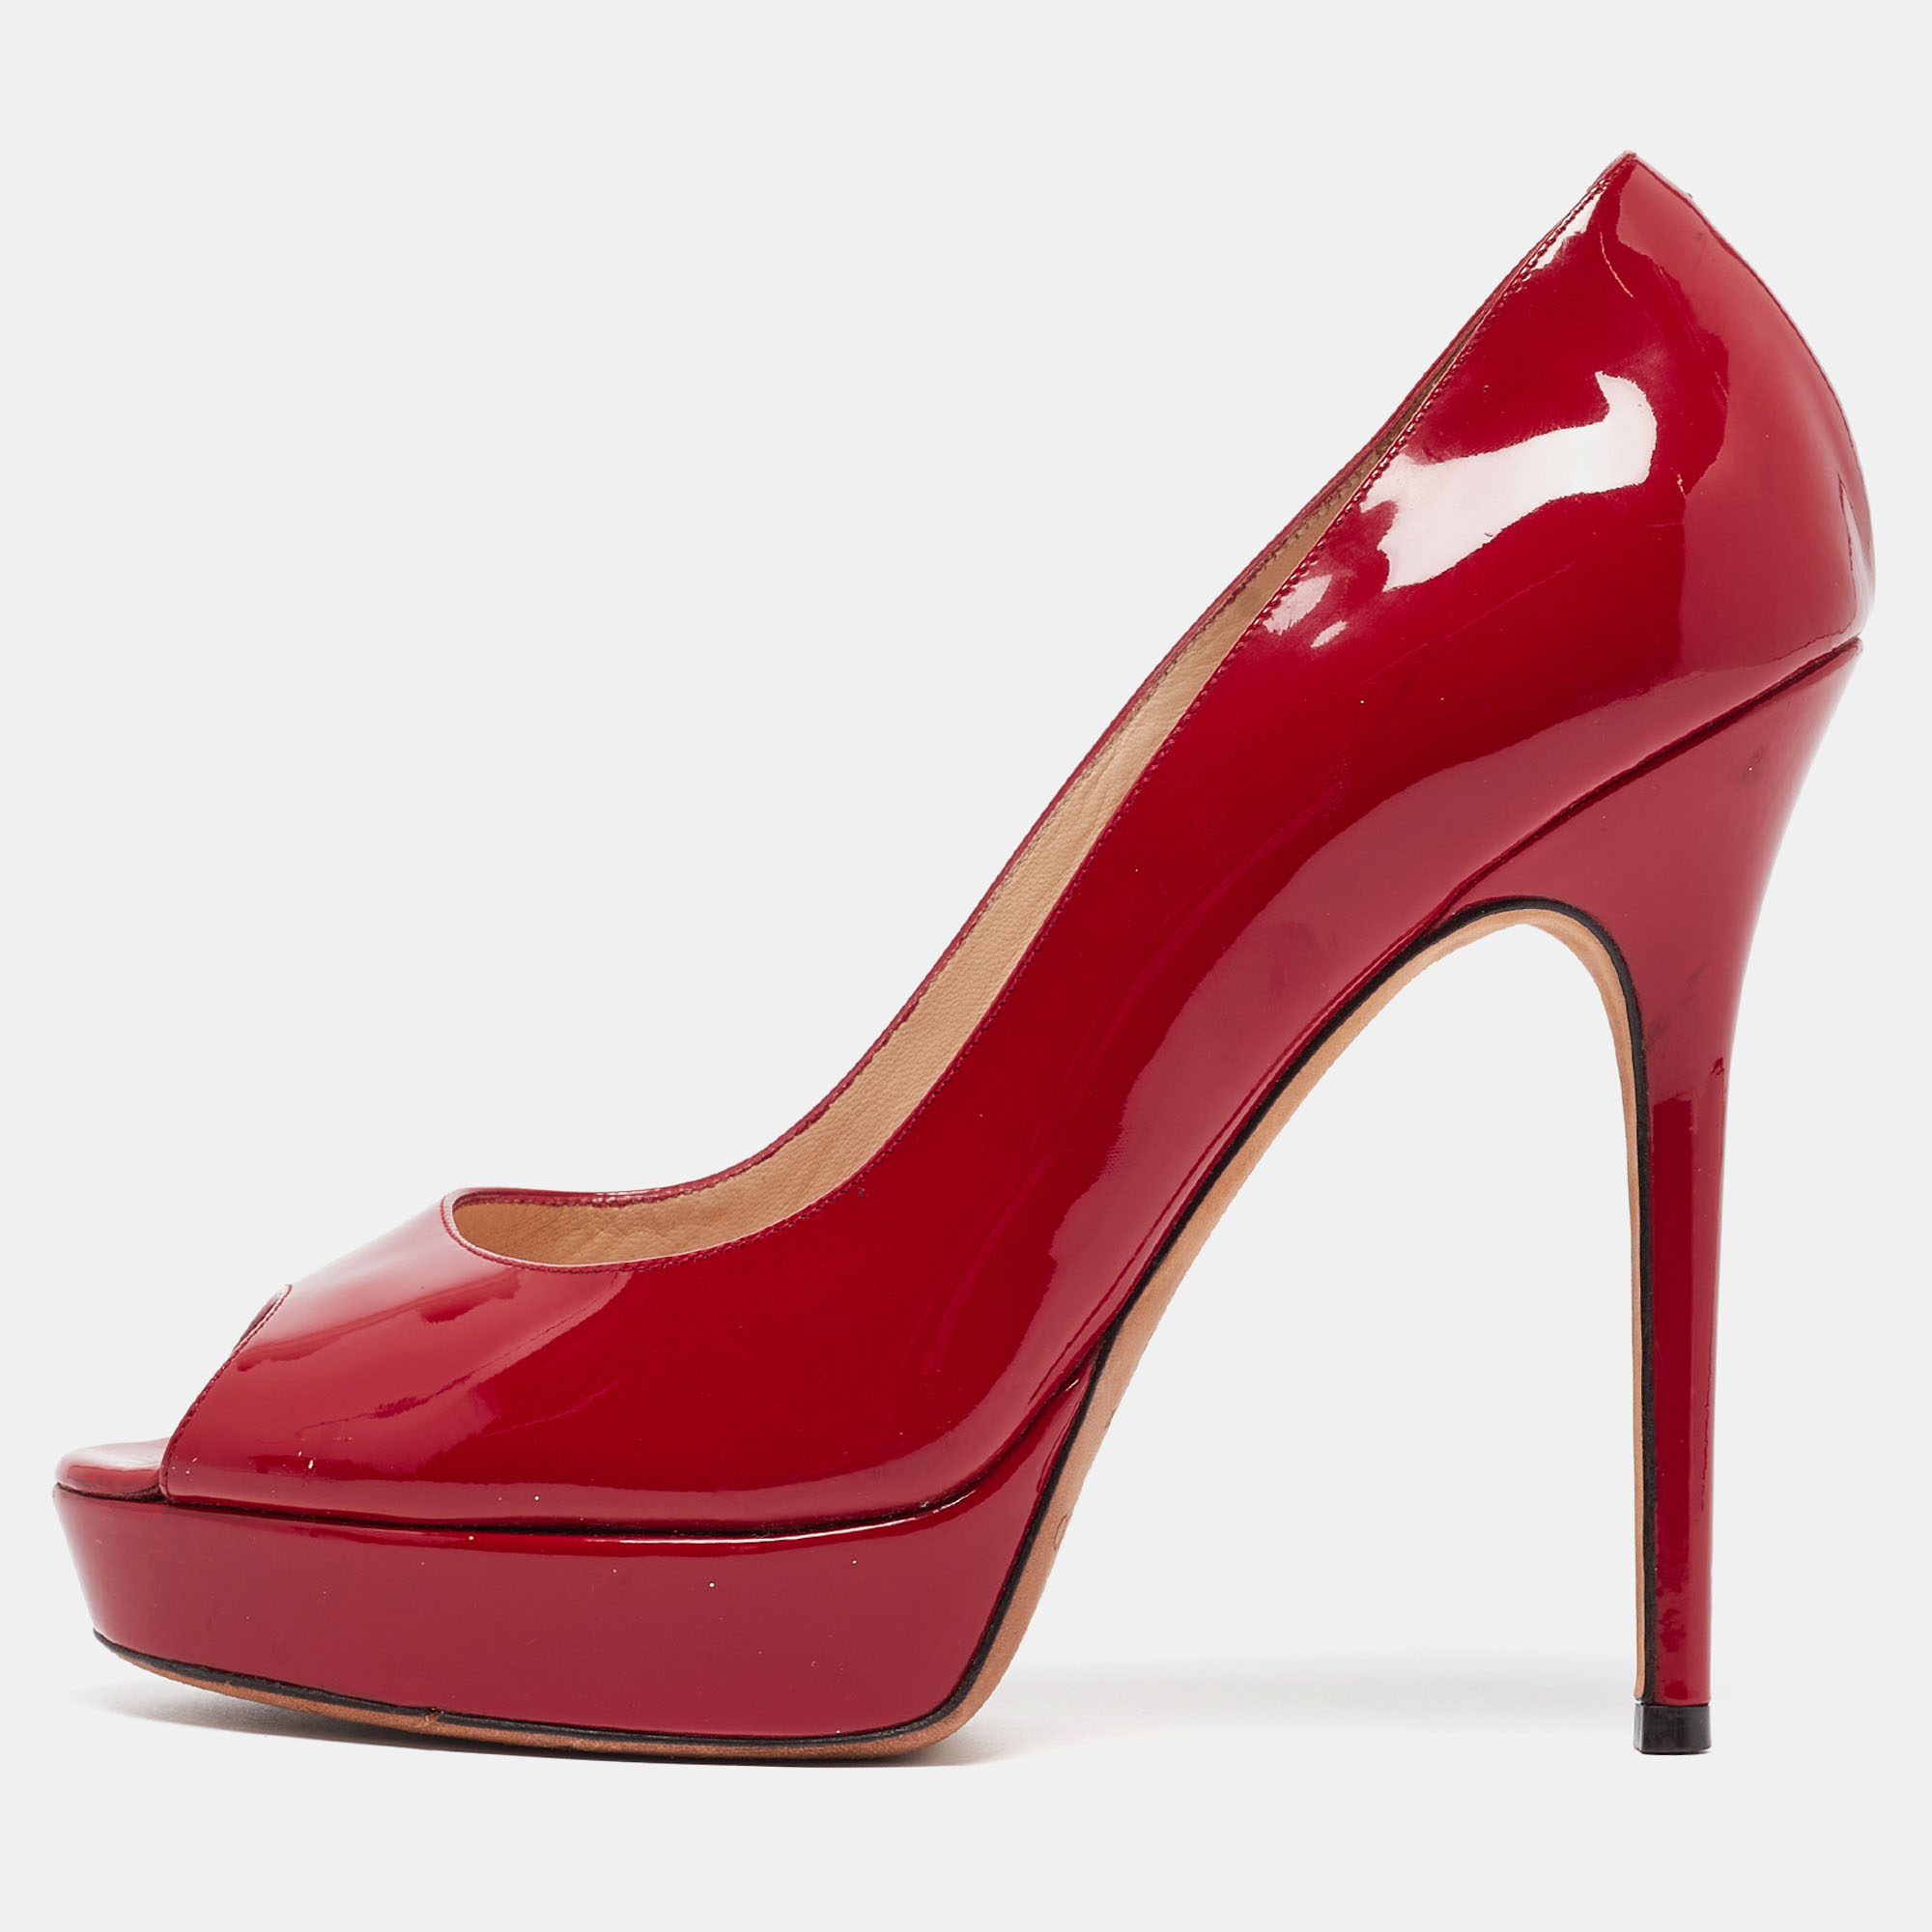 Jimmy choo red patent leather luna pumps size 38.5